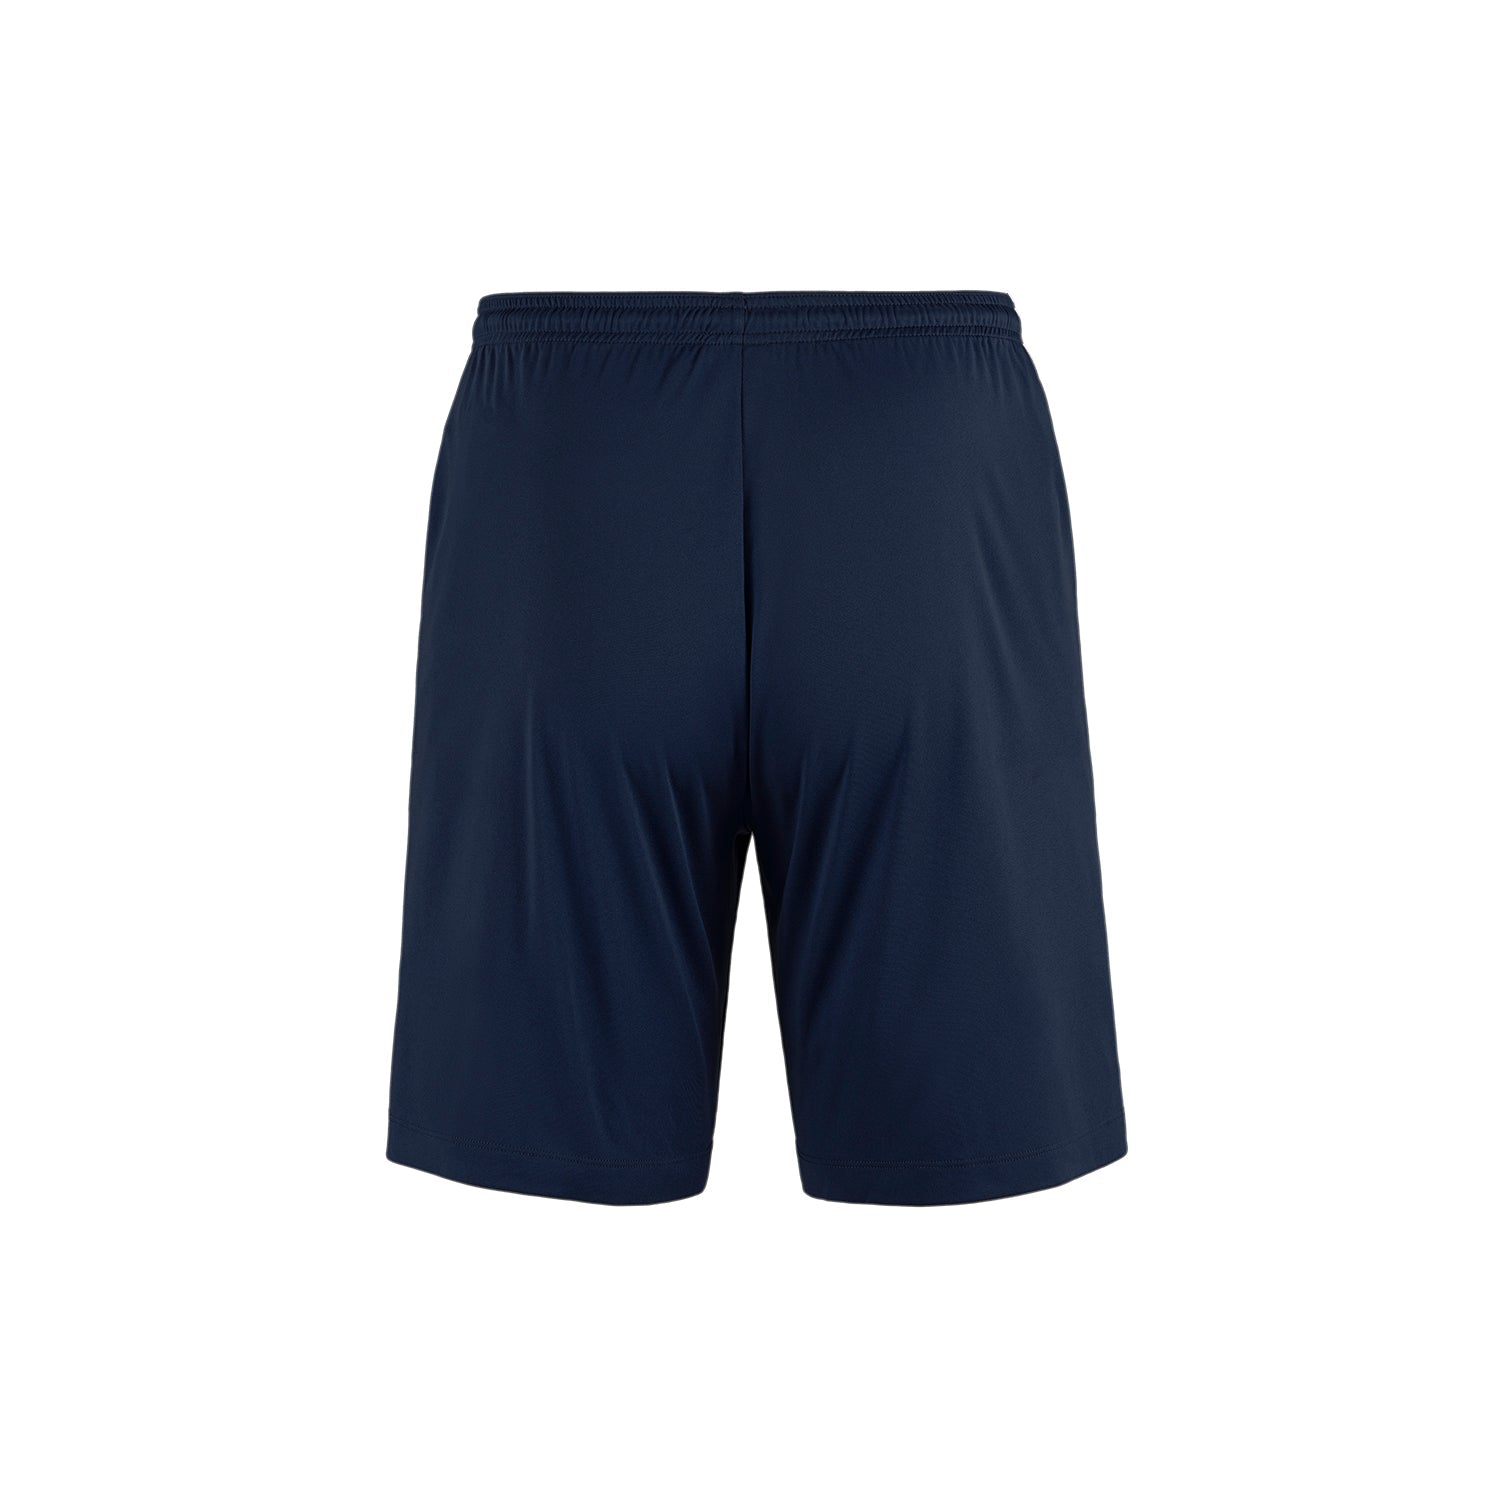 P04475 - Wave Athletic Short with Pockets Bottoms/Shorts